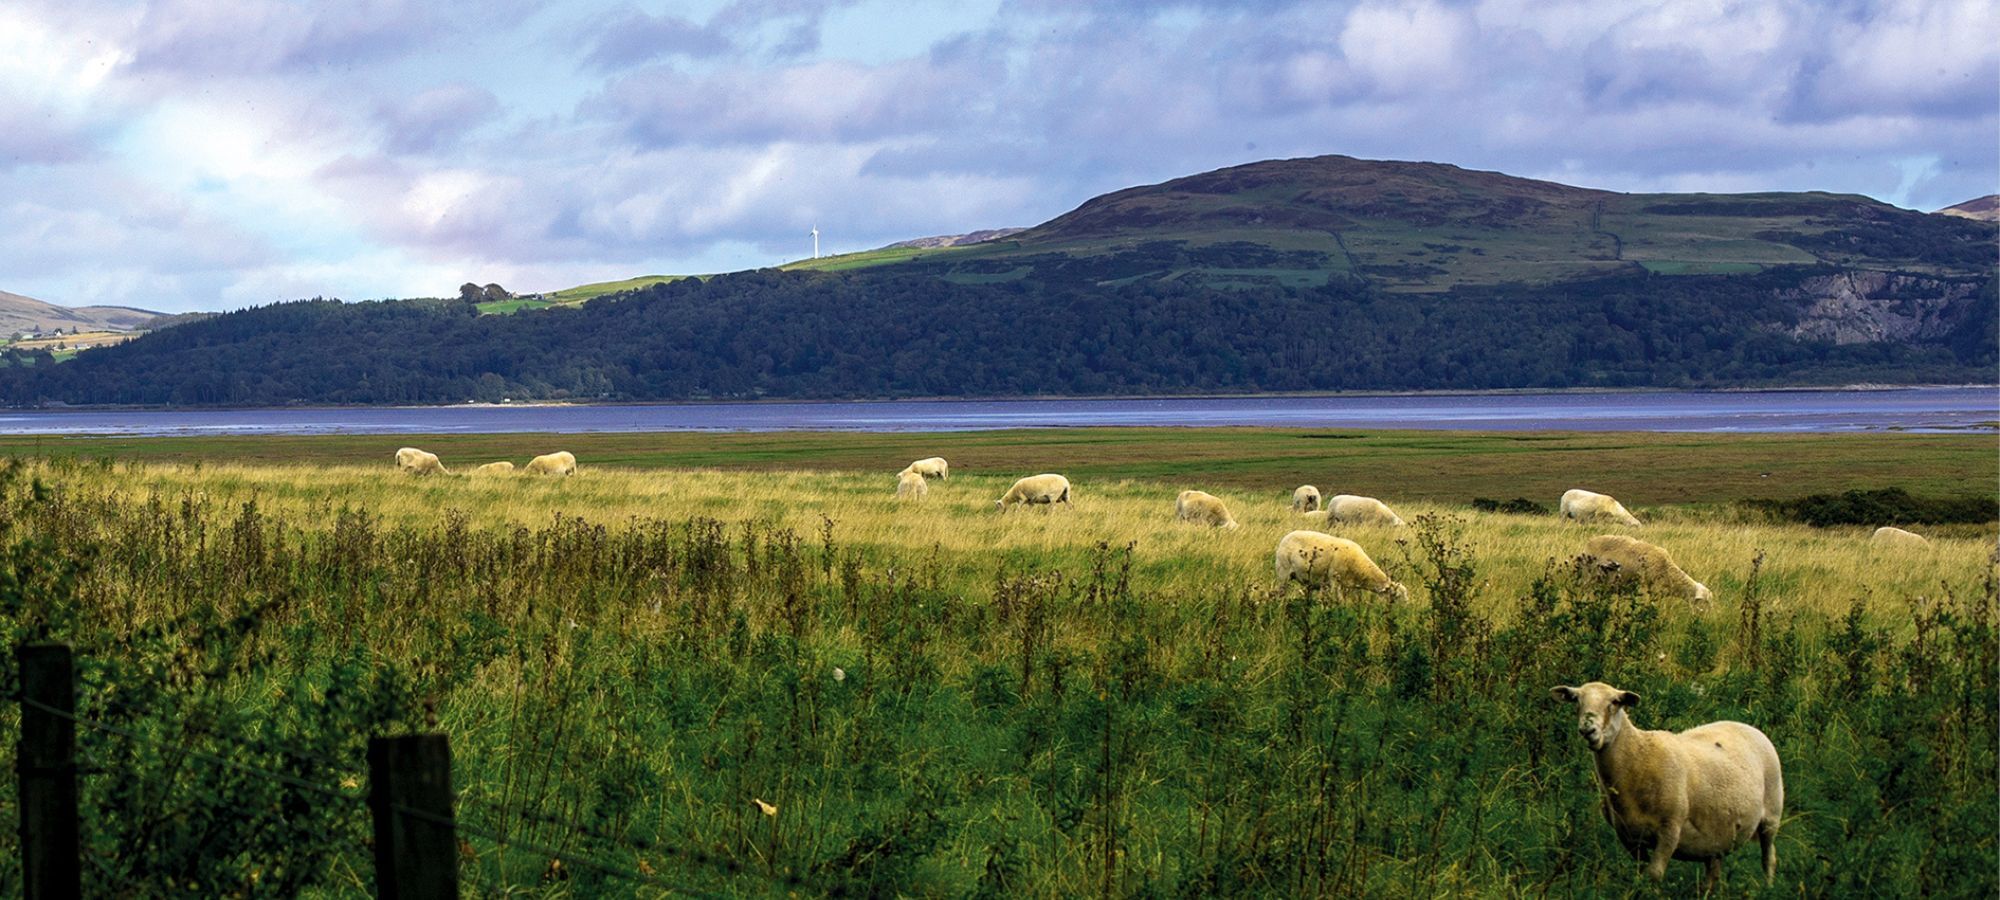 Wigtown Bay, sheep in field in foreground. Rainbow hitting the hills in the background.